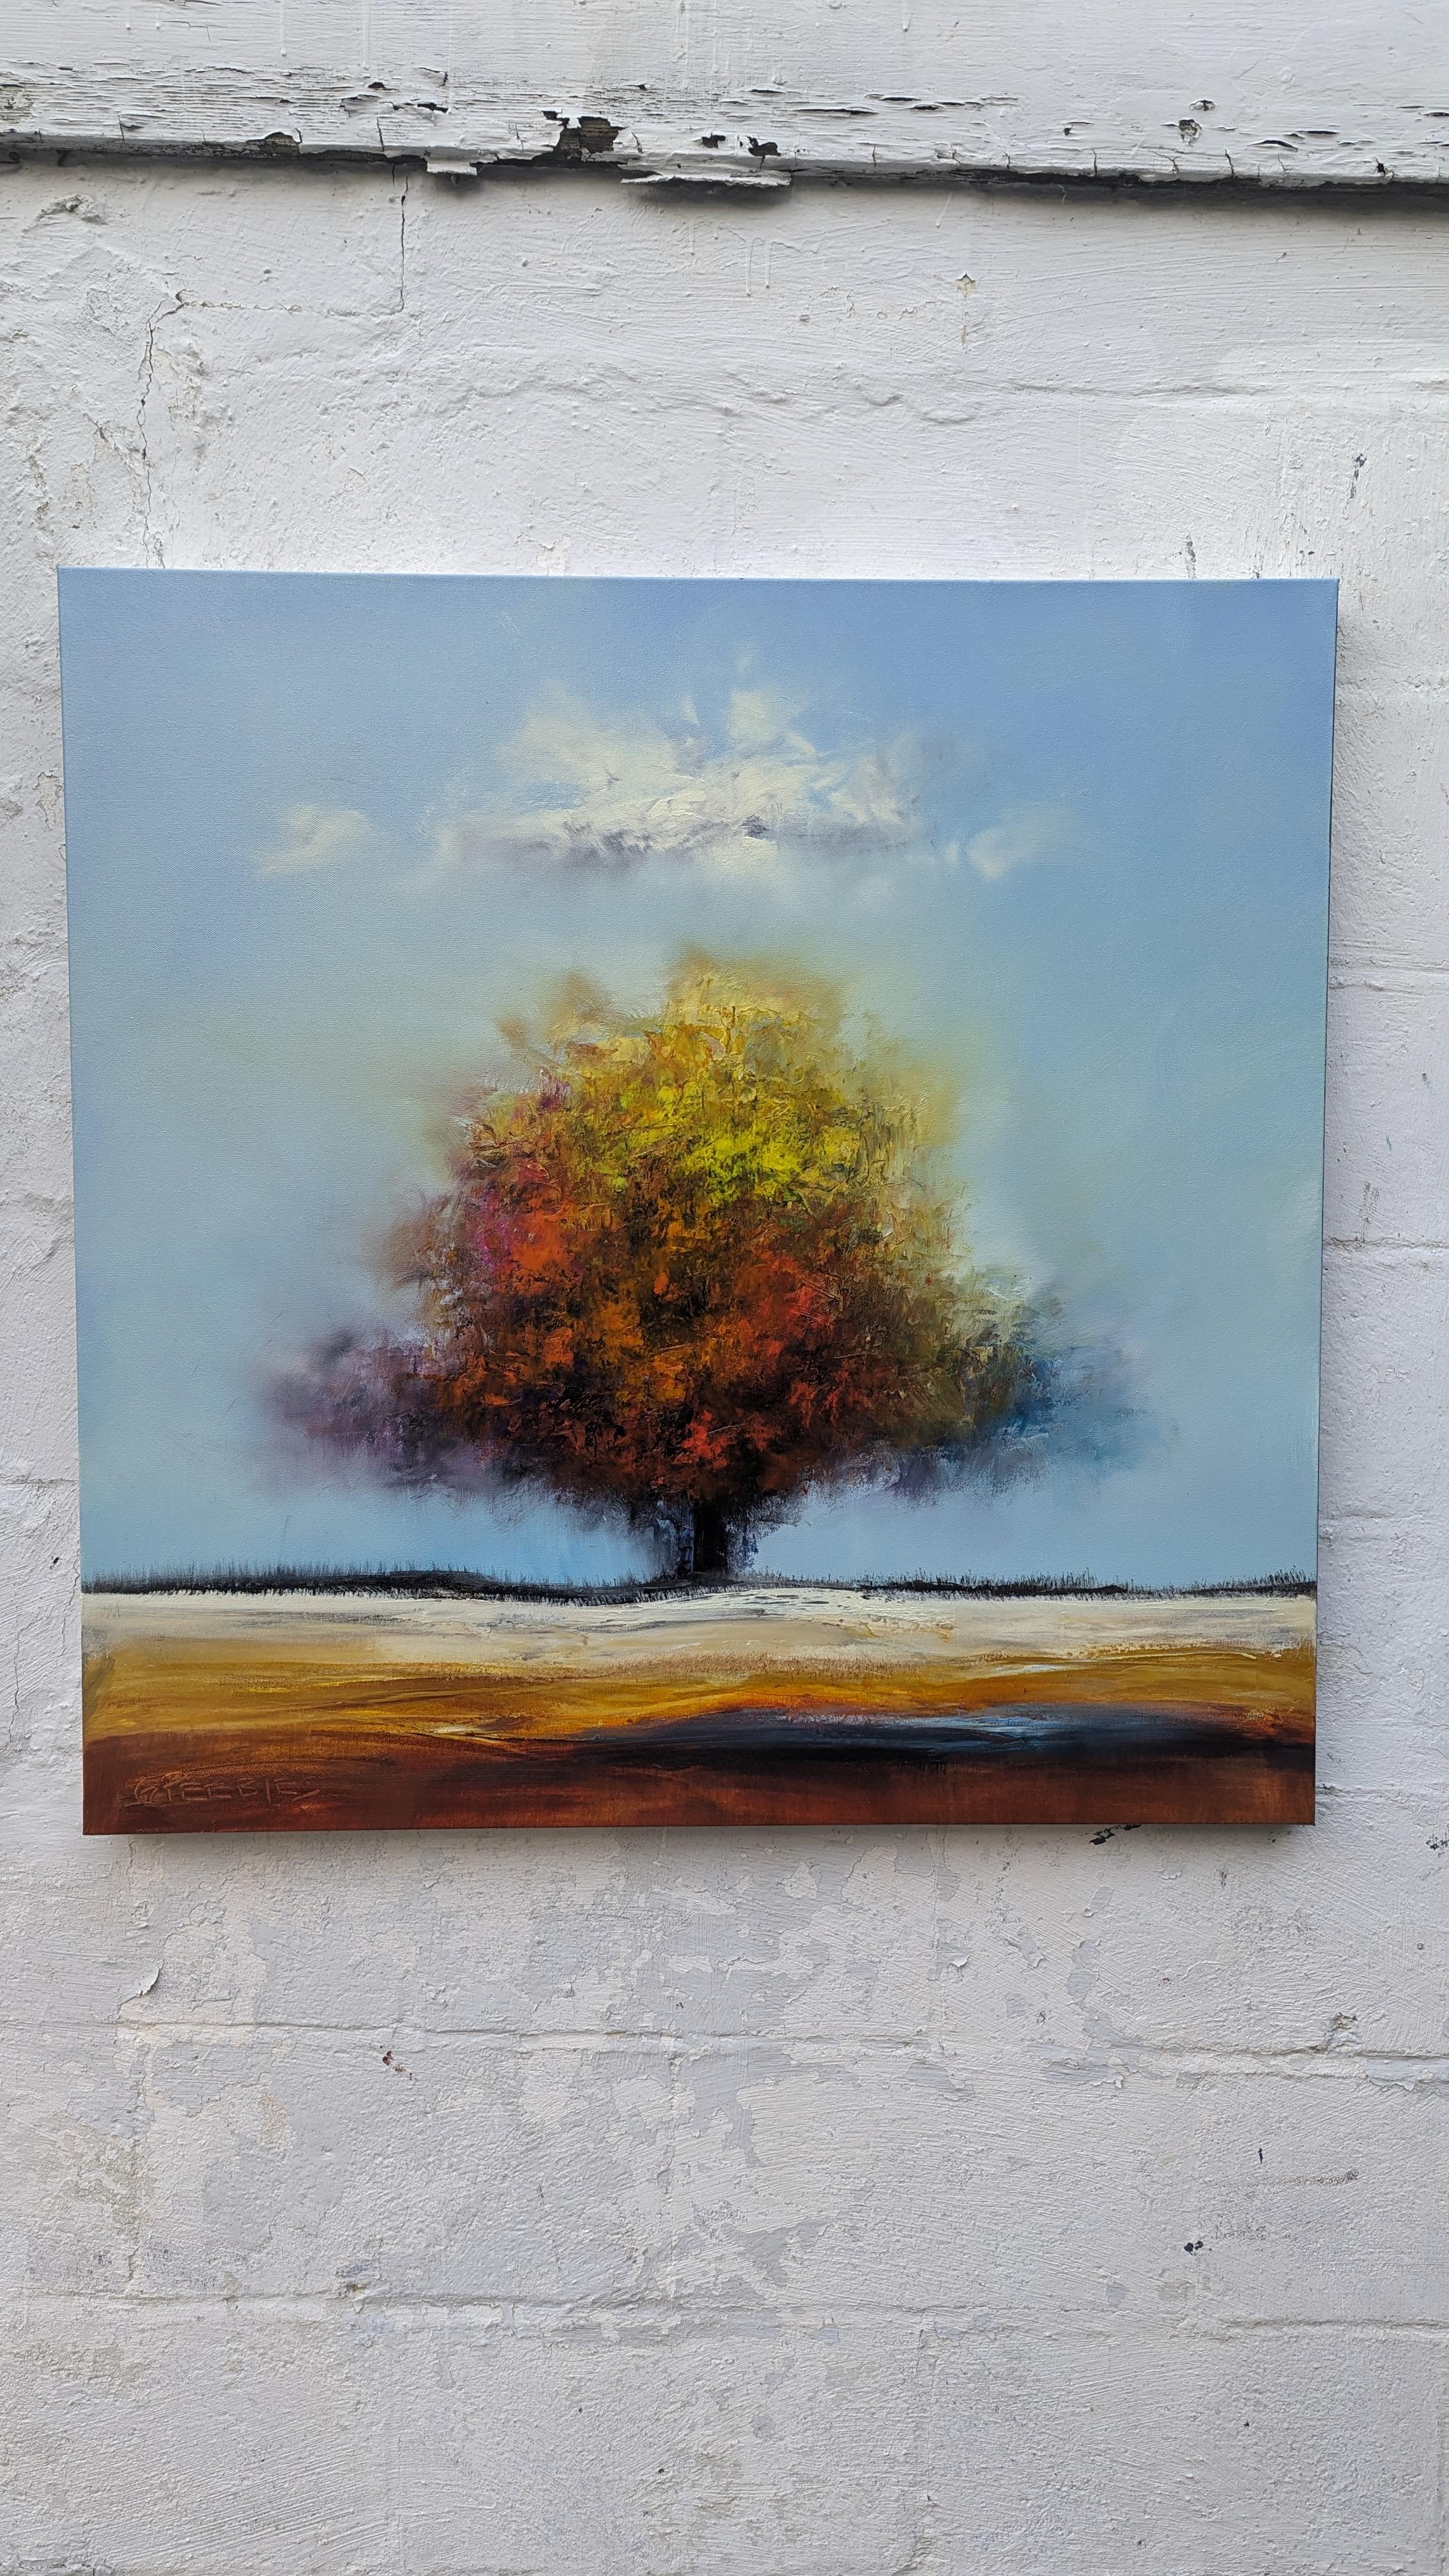 <p>Artist Comments<br>A lone tree stands in the middle of a vast meadow, with a single cloud hovering over it. Its leaves, painted in shades of yellow and red, subtly hint at the changing season. The vibrancy of the foliage stands out against the